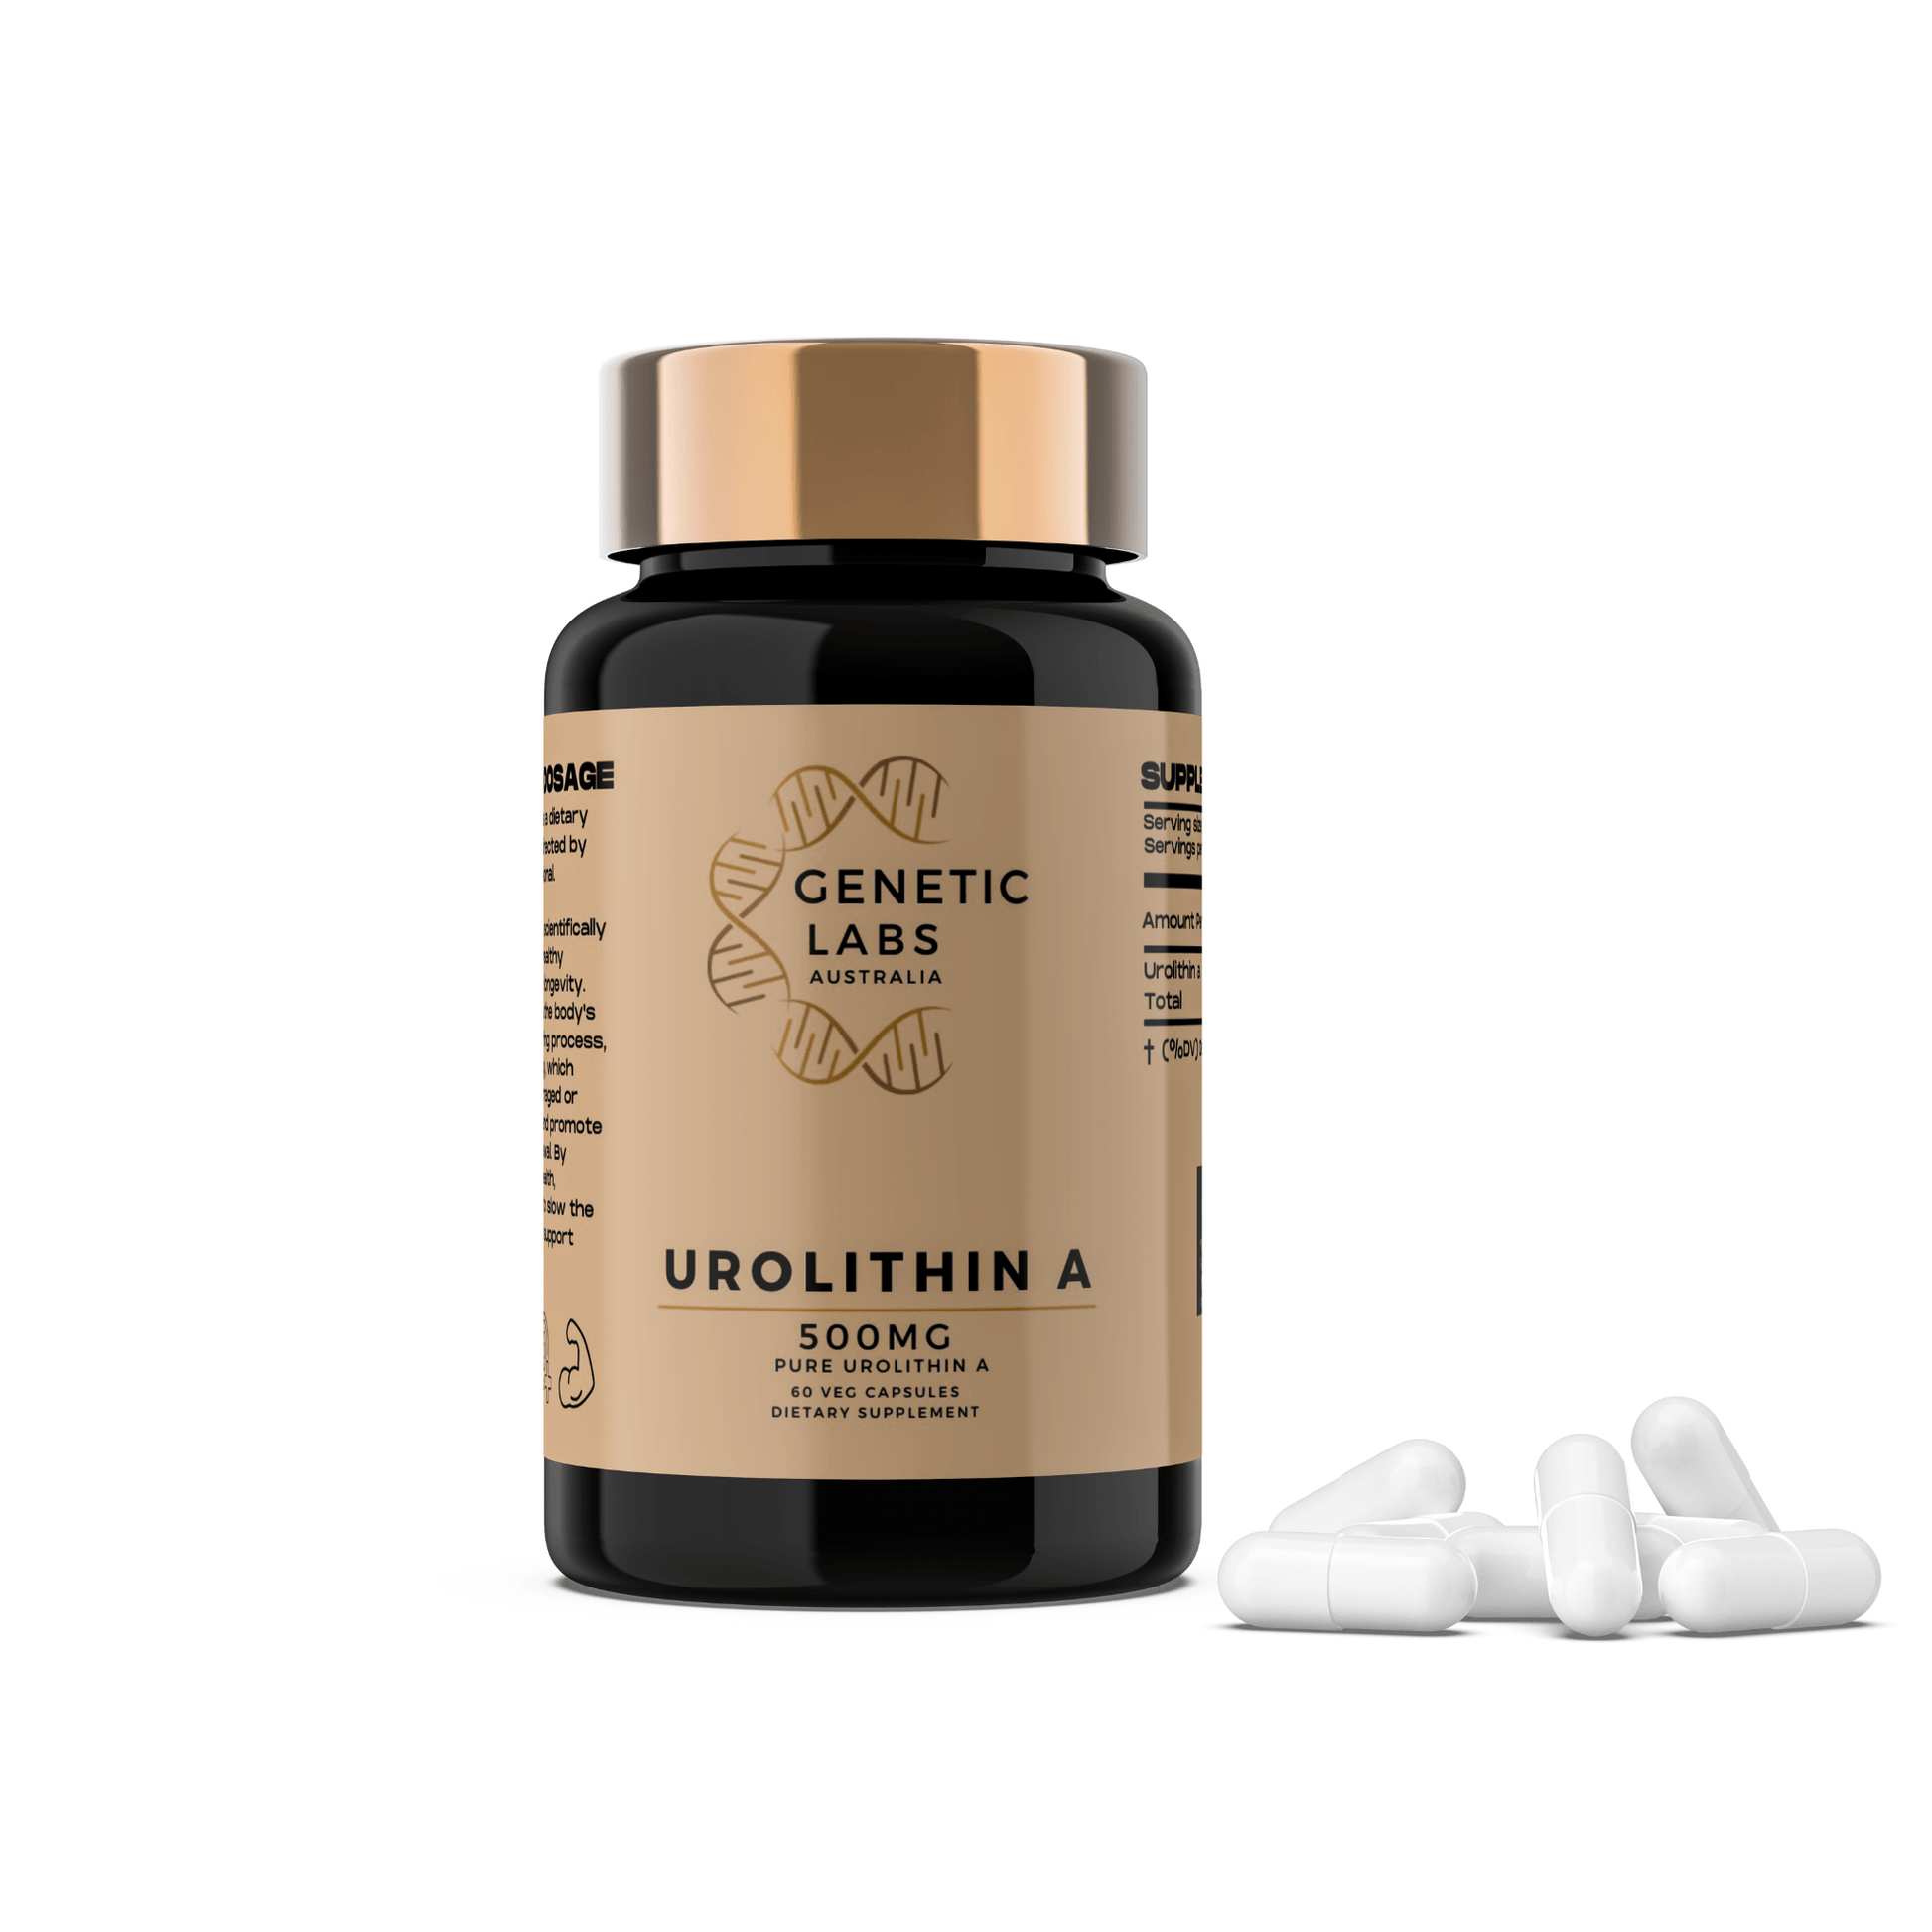 Urolithin A supplement | 60 x 250mg Capsules | Natural Cellular Health Booster - Genetic Labs Australia